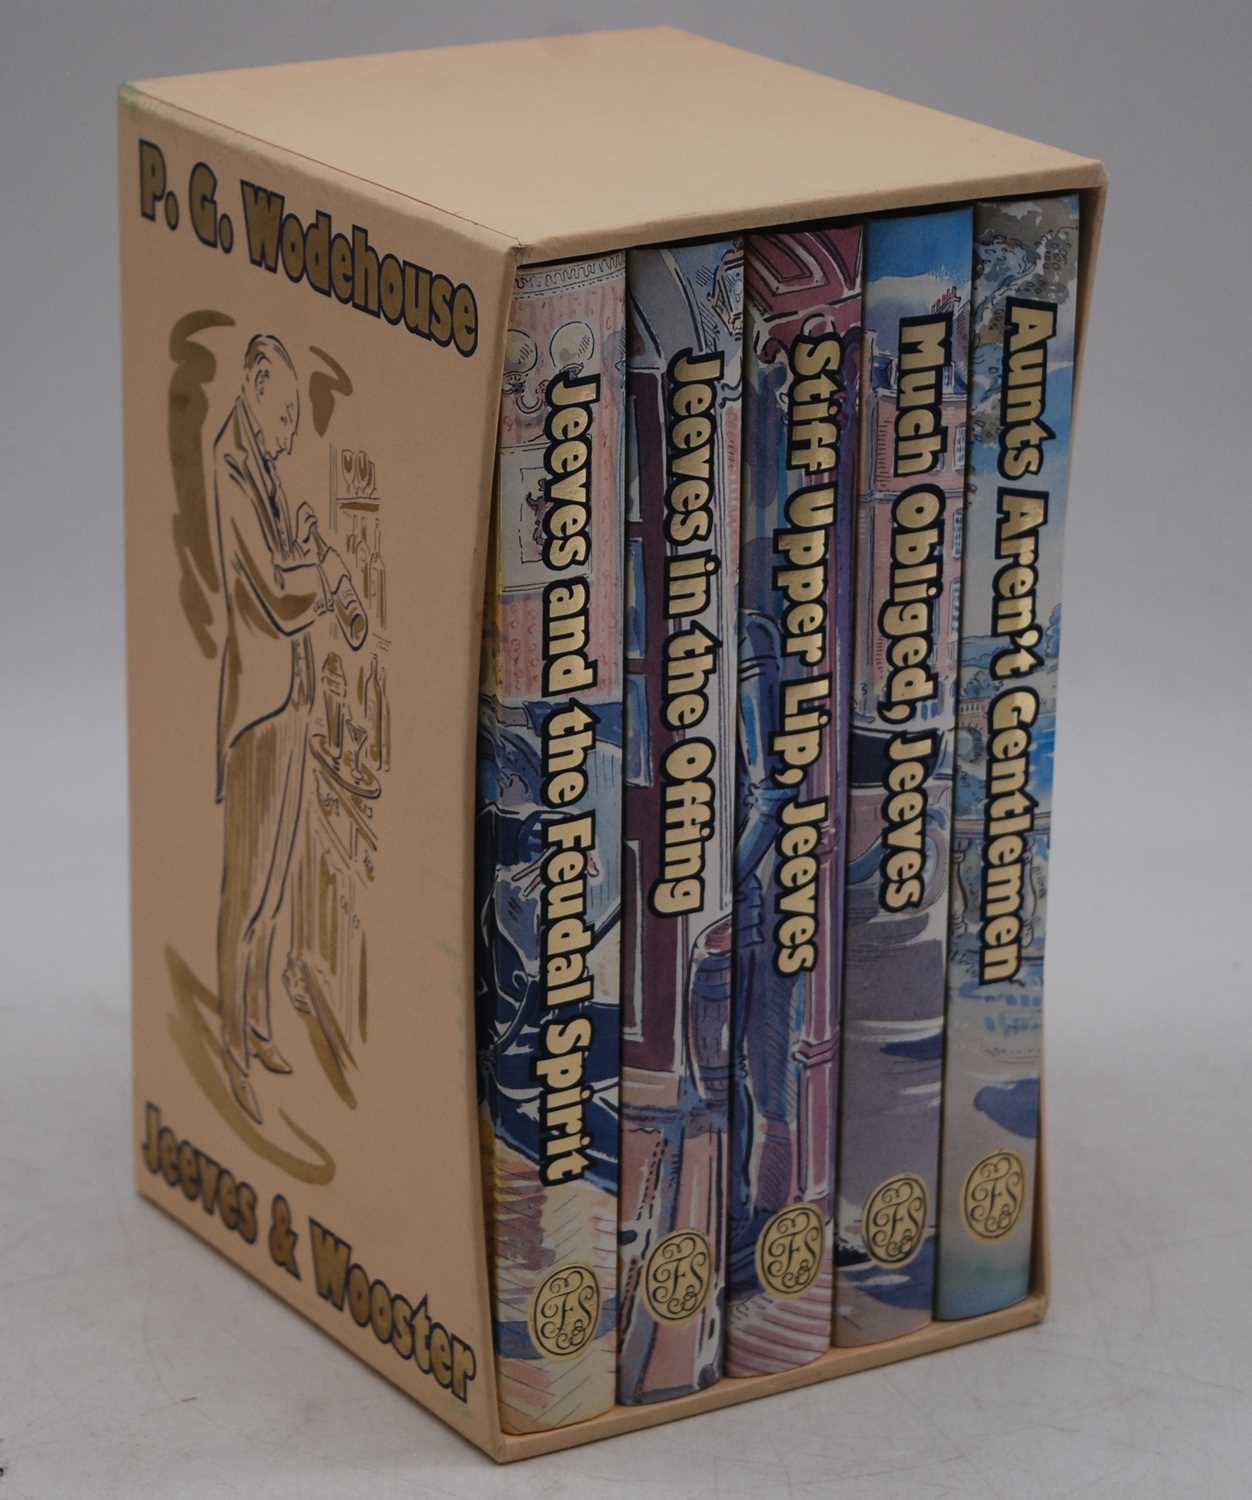 Wodehouse, P.G.: A collection of Folio Society volumes, in sets and housed in slip-cases to - Image 2 of 5